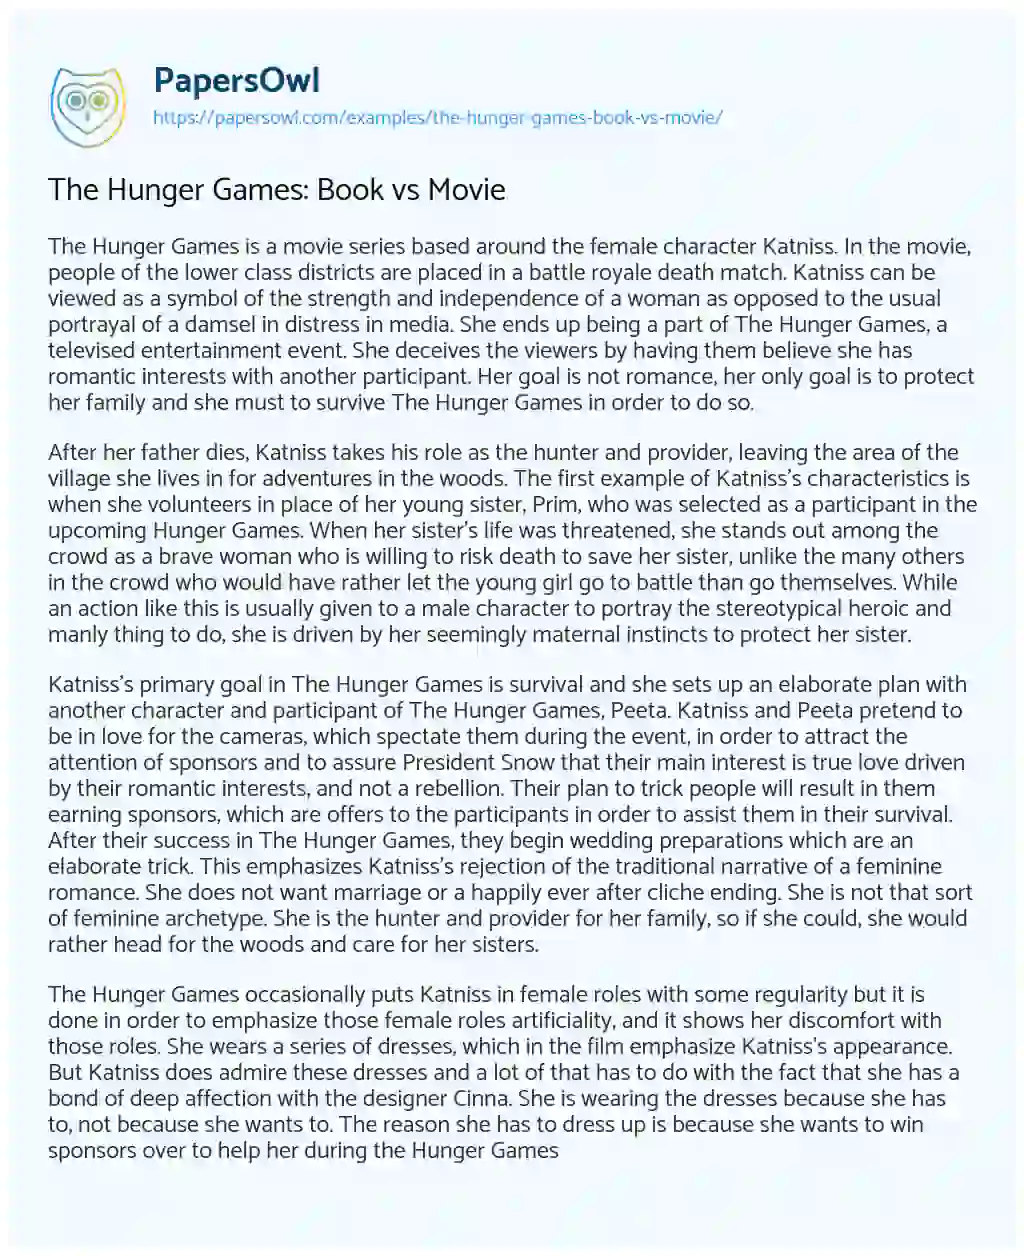 Essay on The Hunger Games: Book Vs Movie